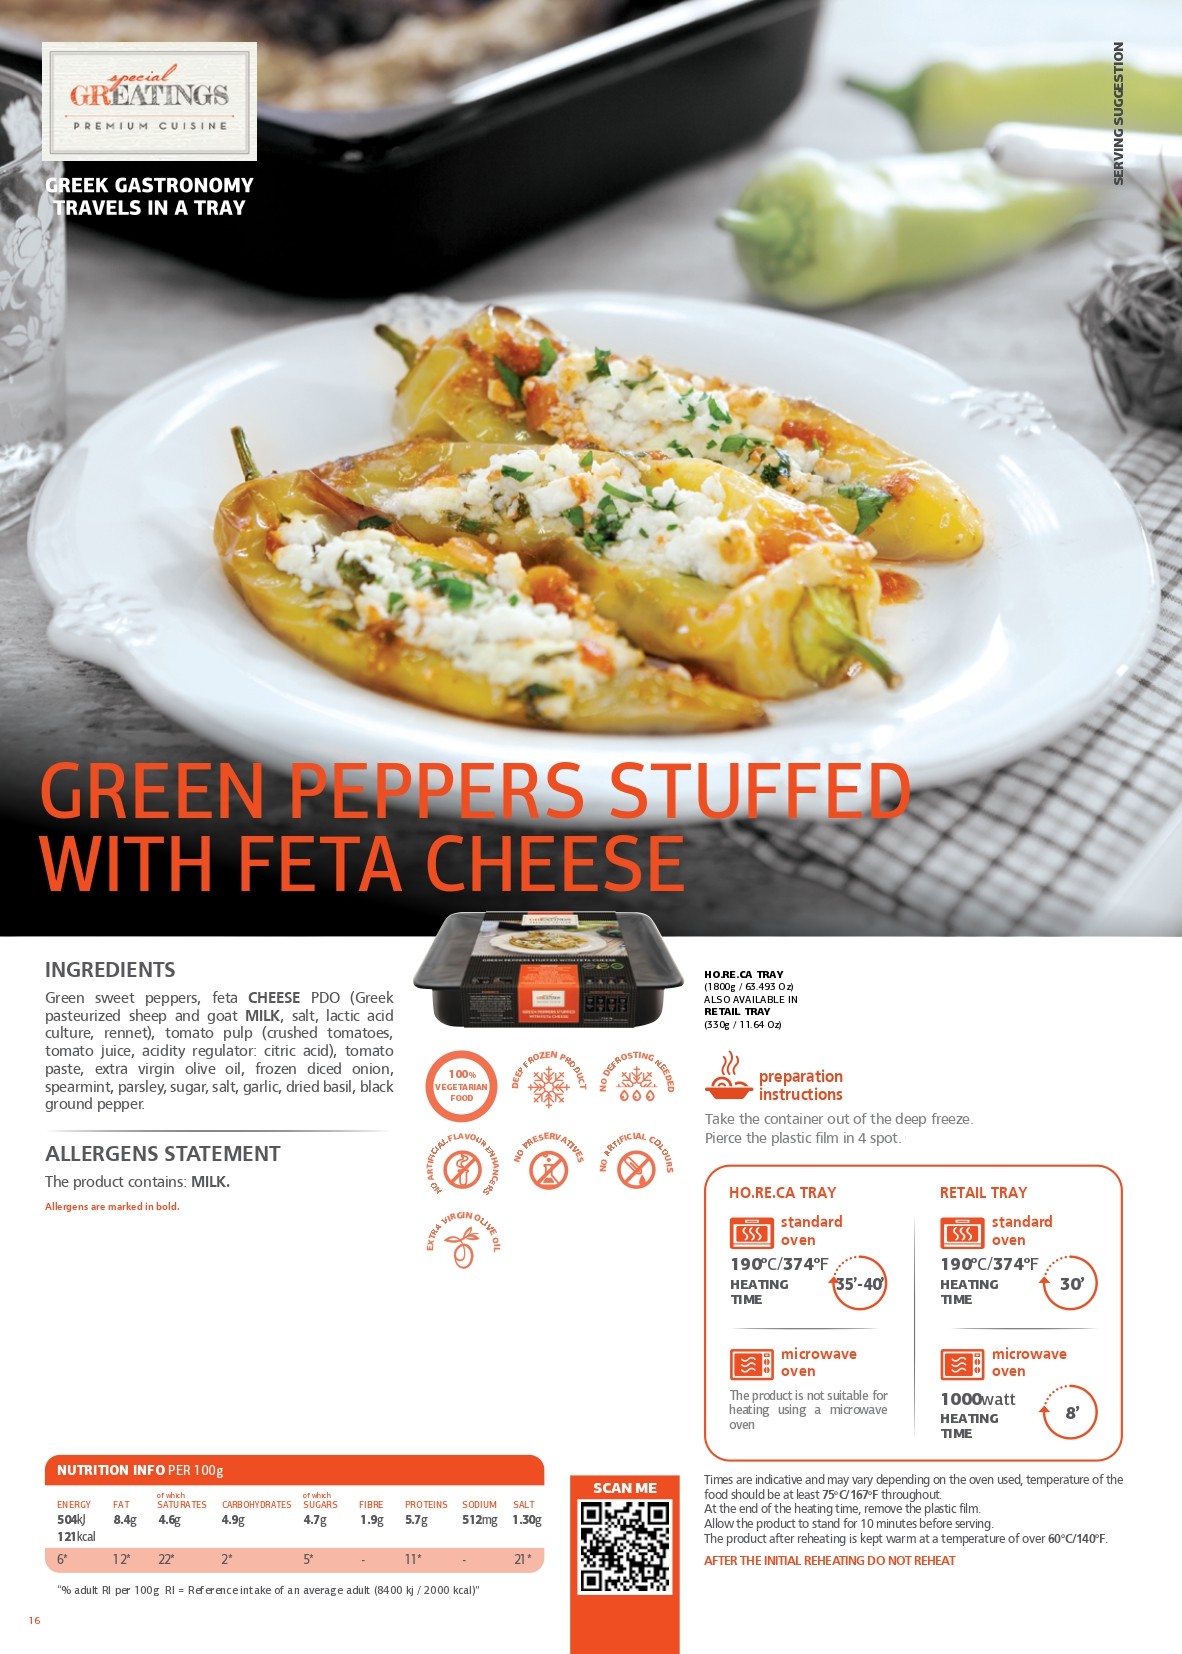 Greek peppers stuffed with feta cheese PDO pdf image